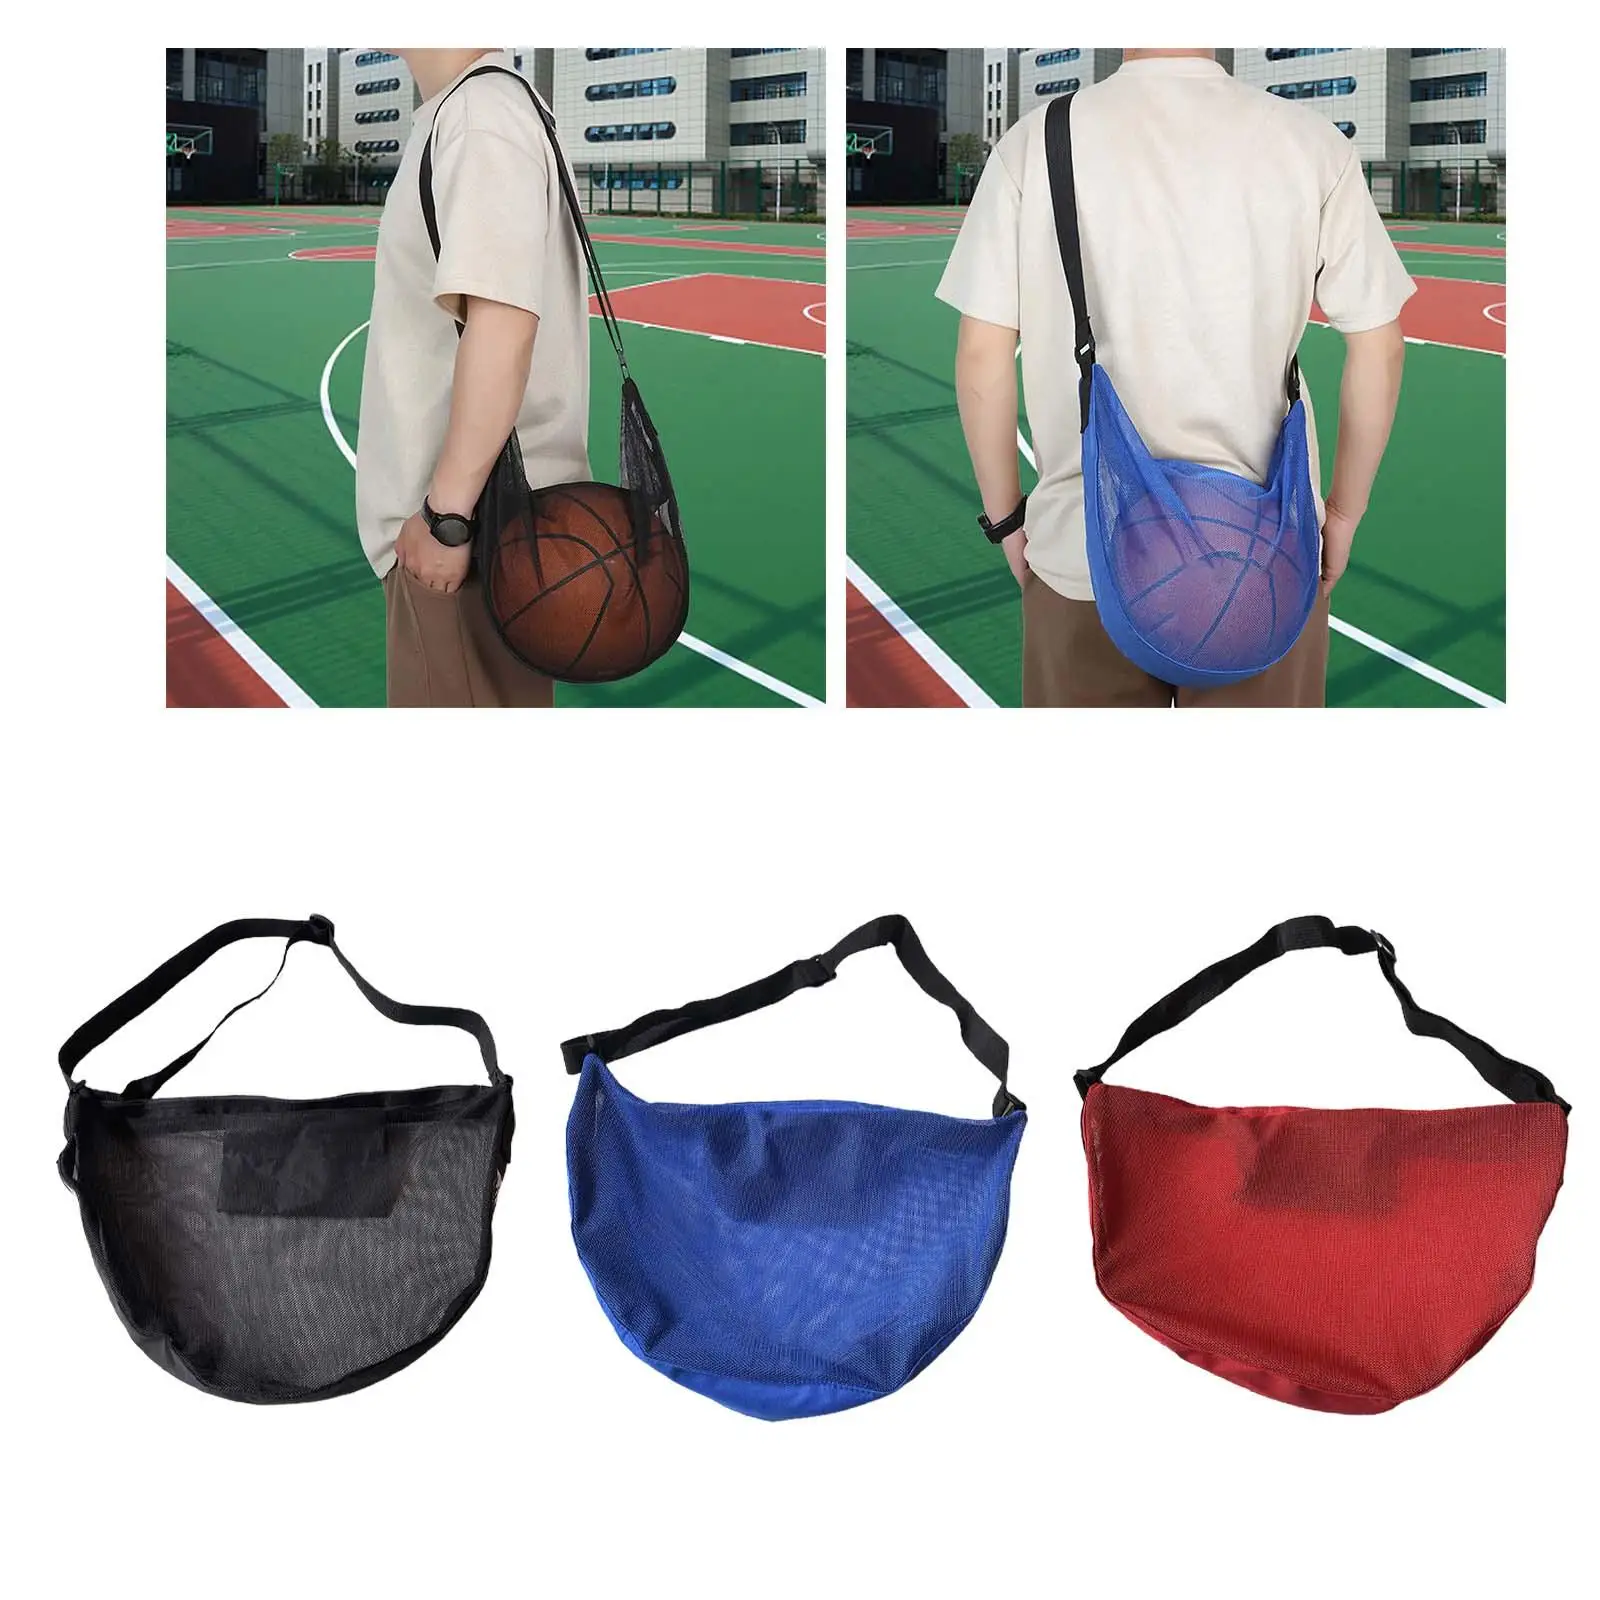 Basketball Carry Bag Storage with Shoulder Strap Ball Holder Ball Bags Mesh for Garage Soccer Exercise Practice Football